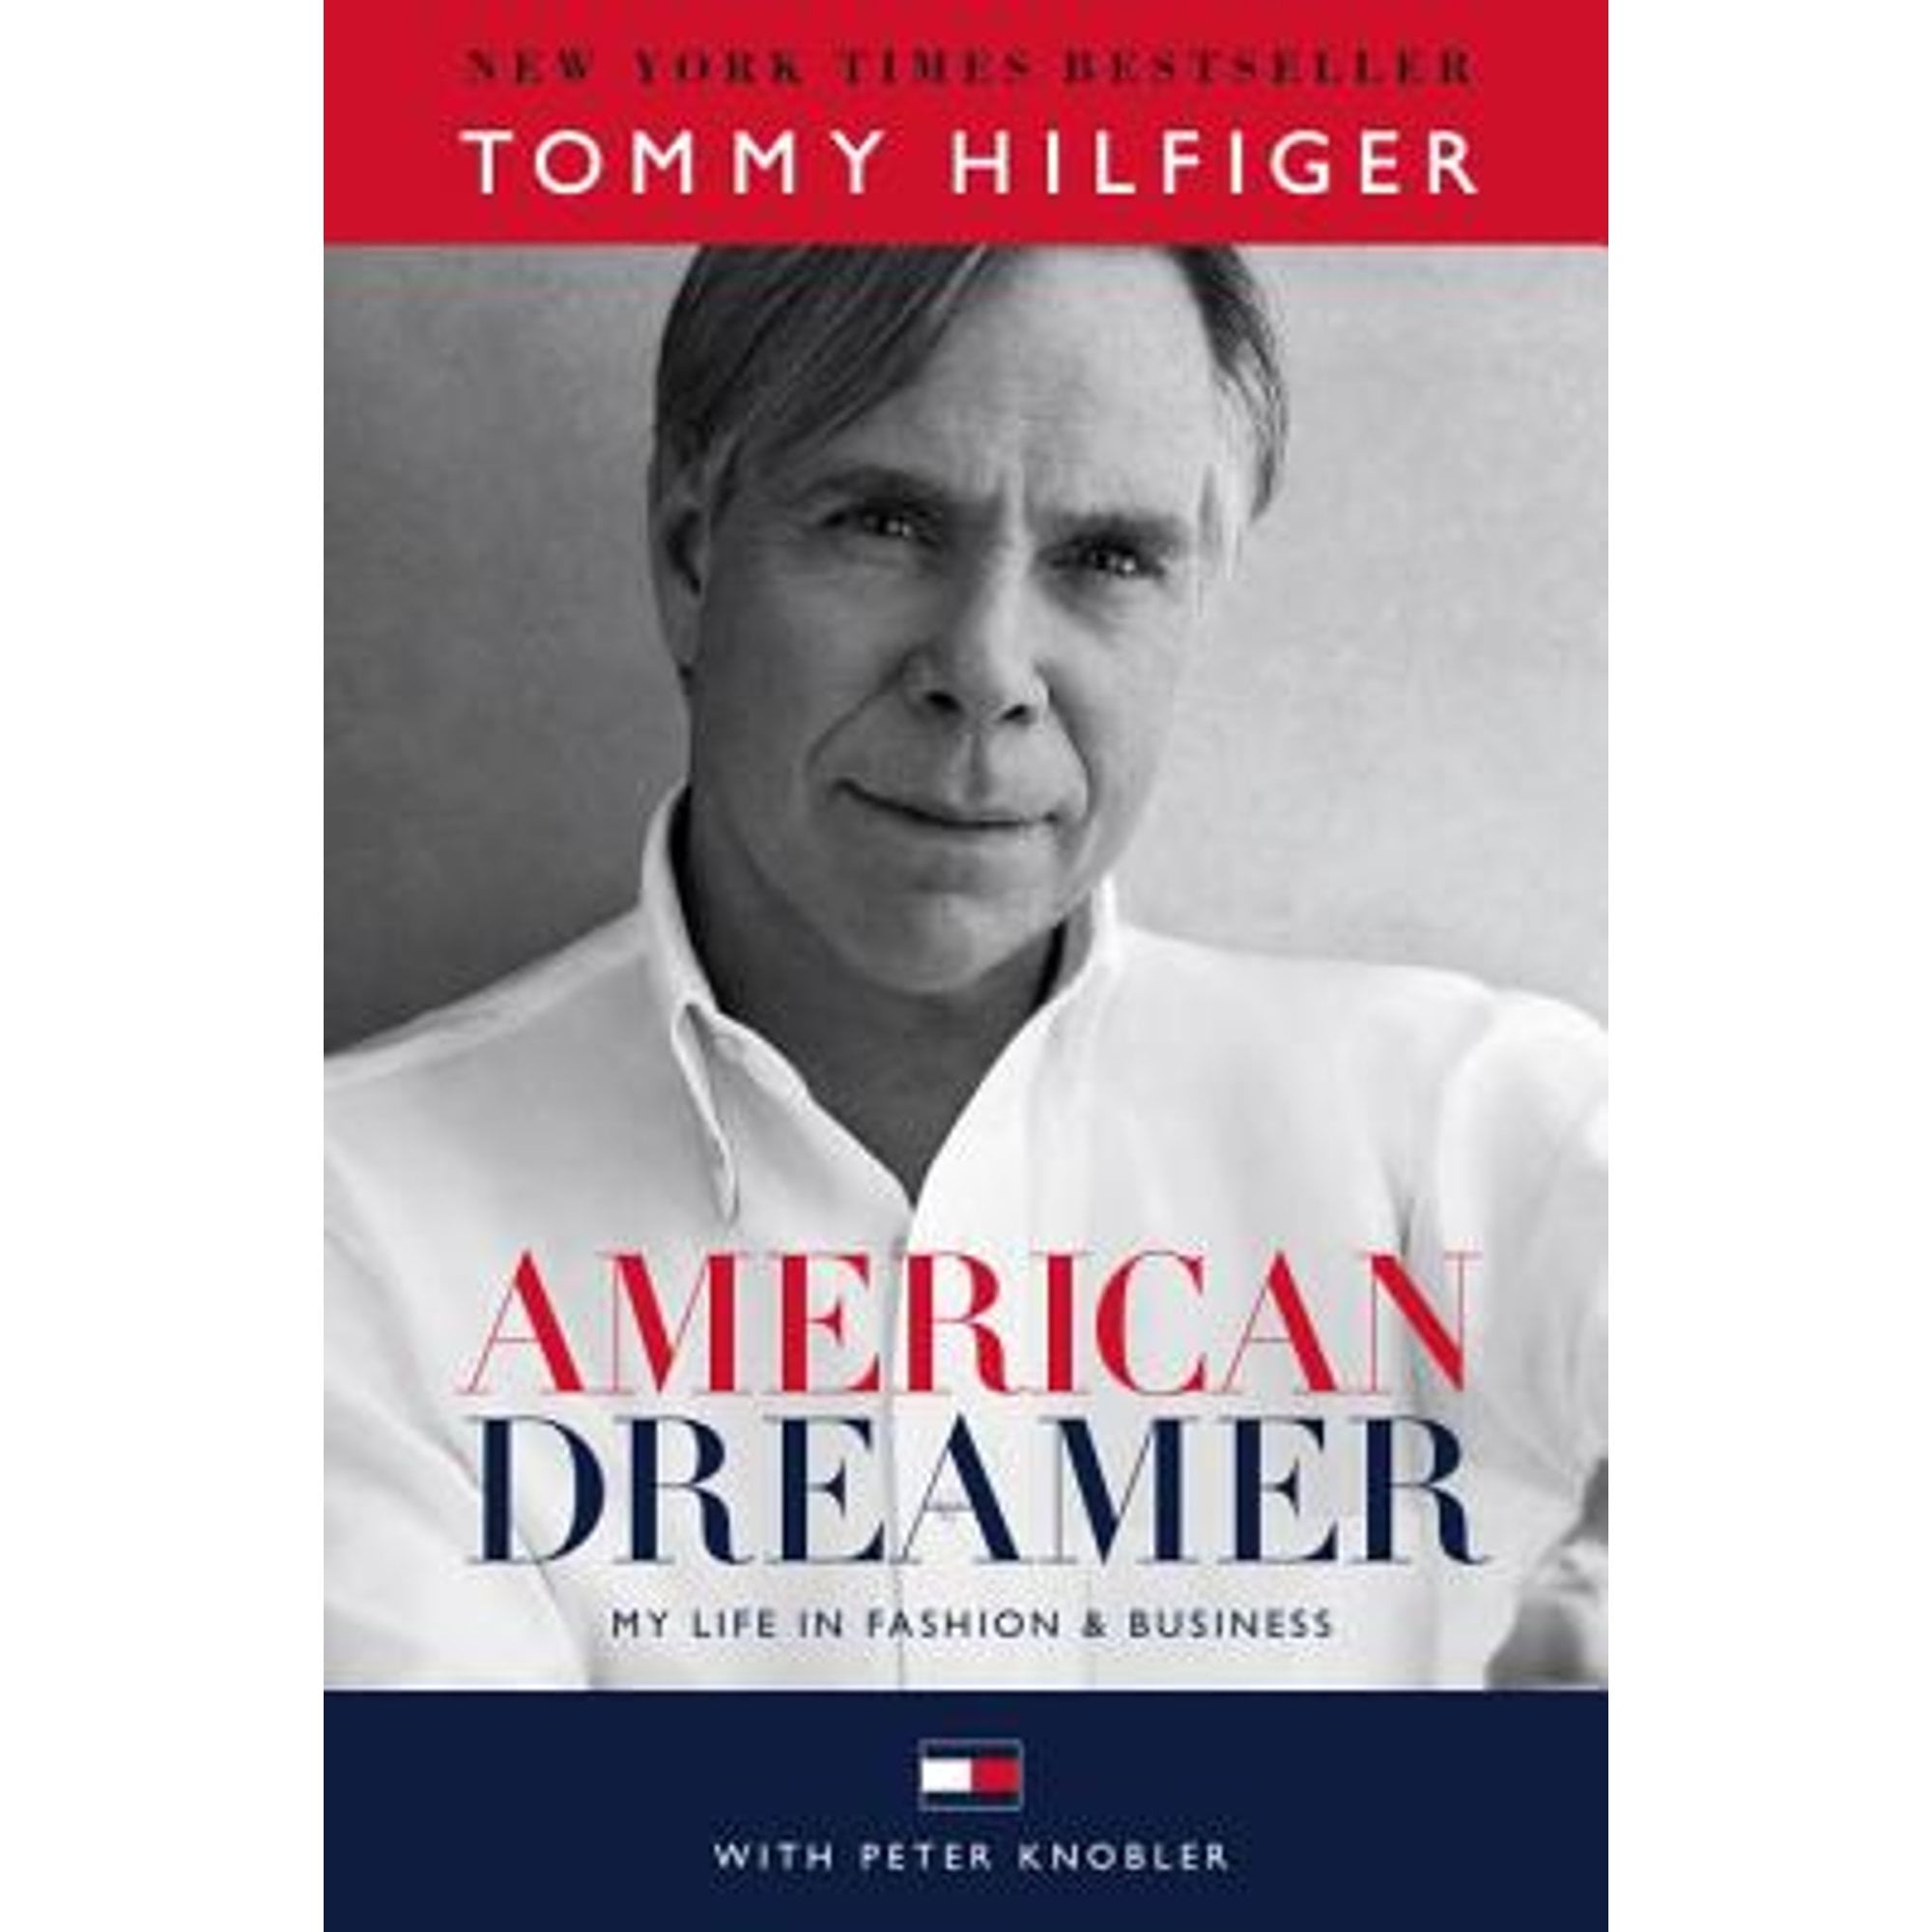 Afvist Tid chokolade American Dreamer: My Life in Fashion & Business (Pre-Owned Hardcover  9781101886212) by Tommy Hilfiger, Peter Knobler, Quincy Jones - Walmart.com